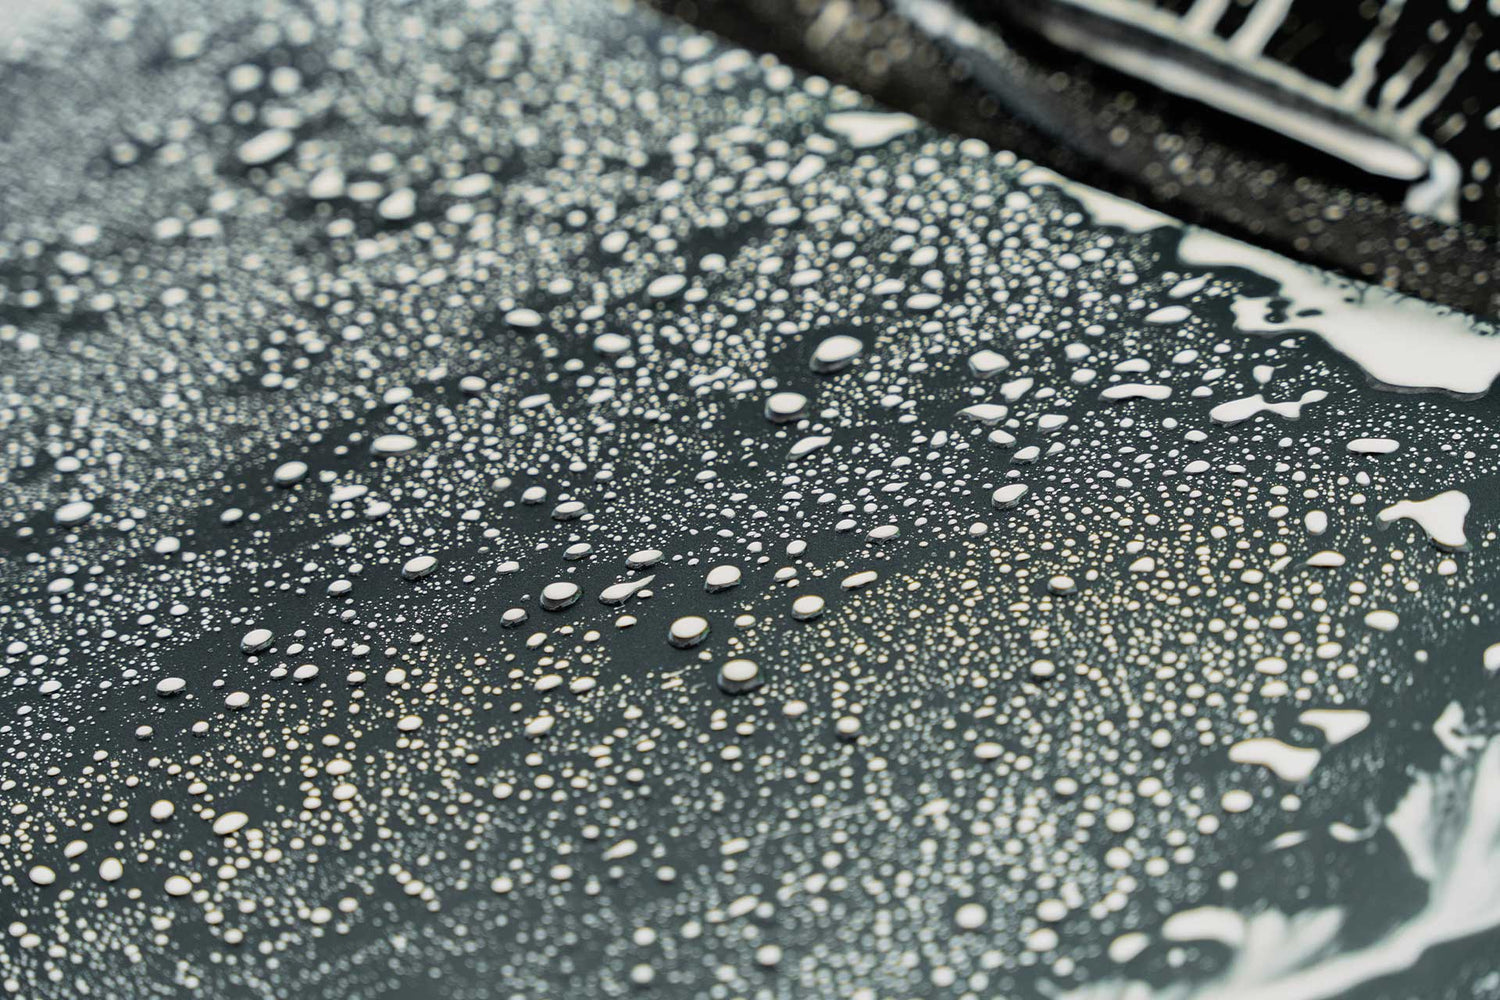 hydrophobic beading effect on surface of vehicle paint